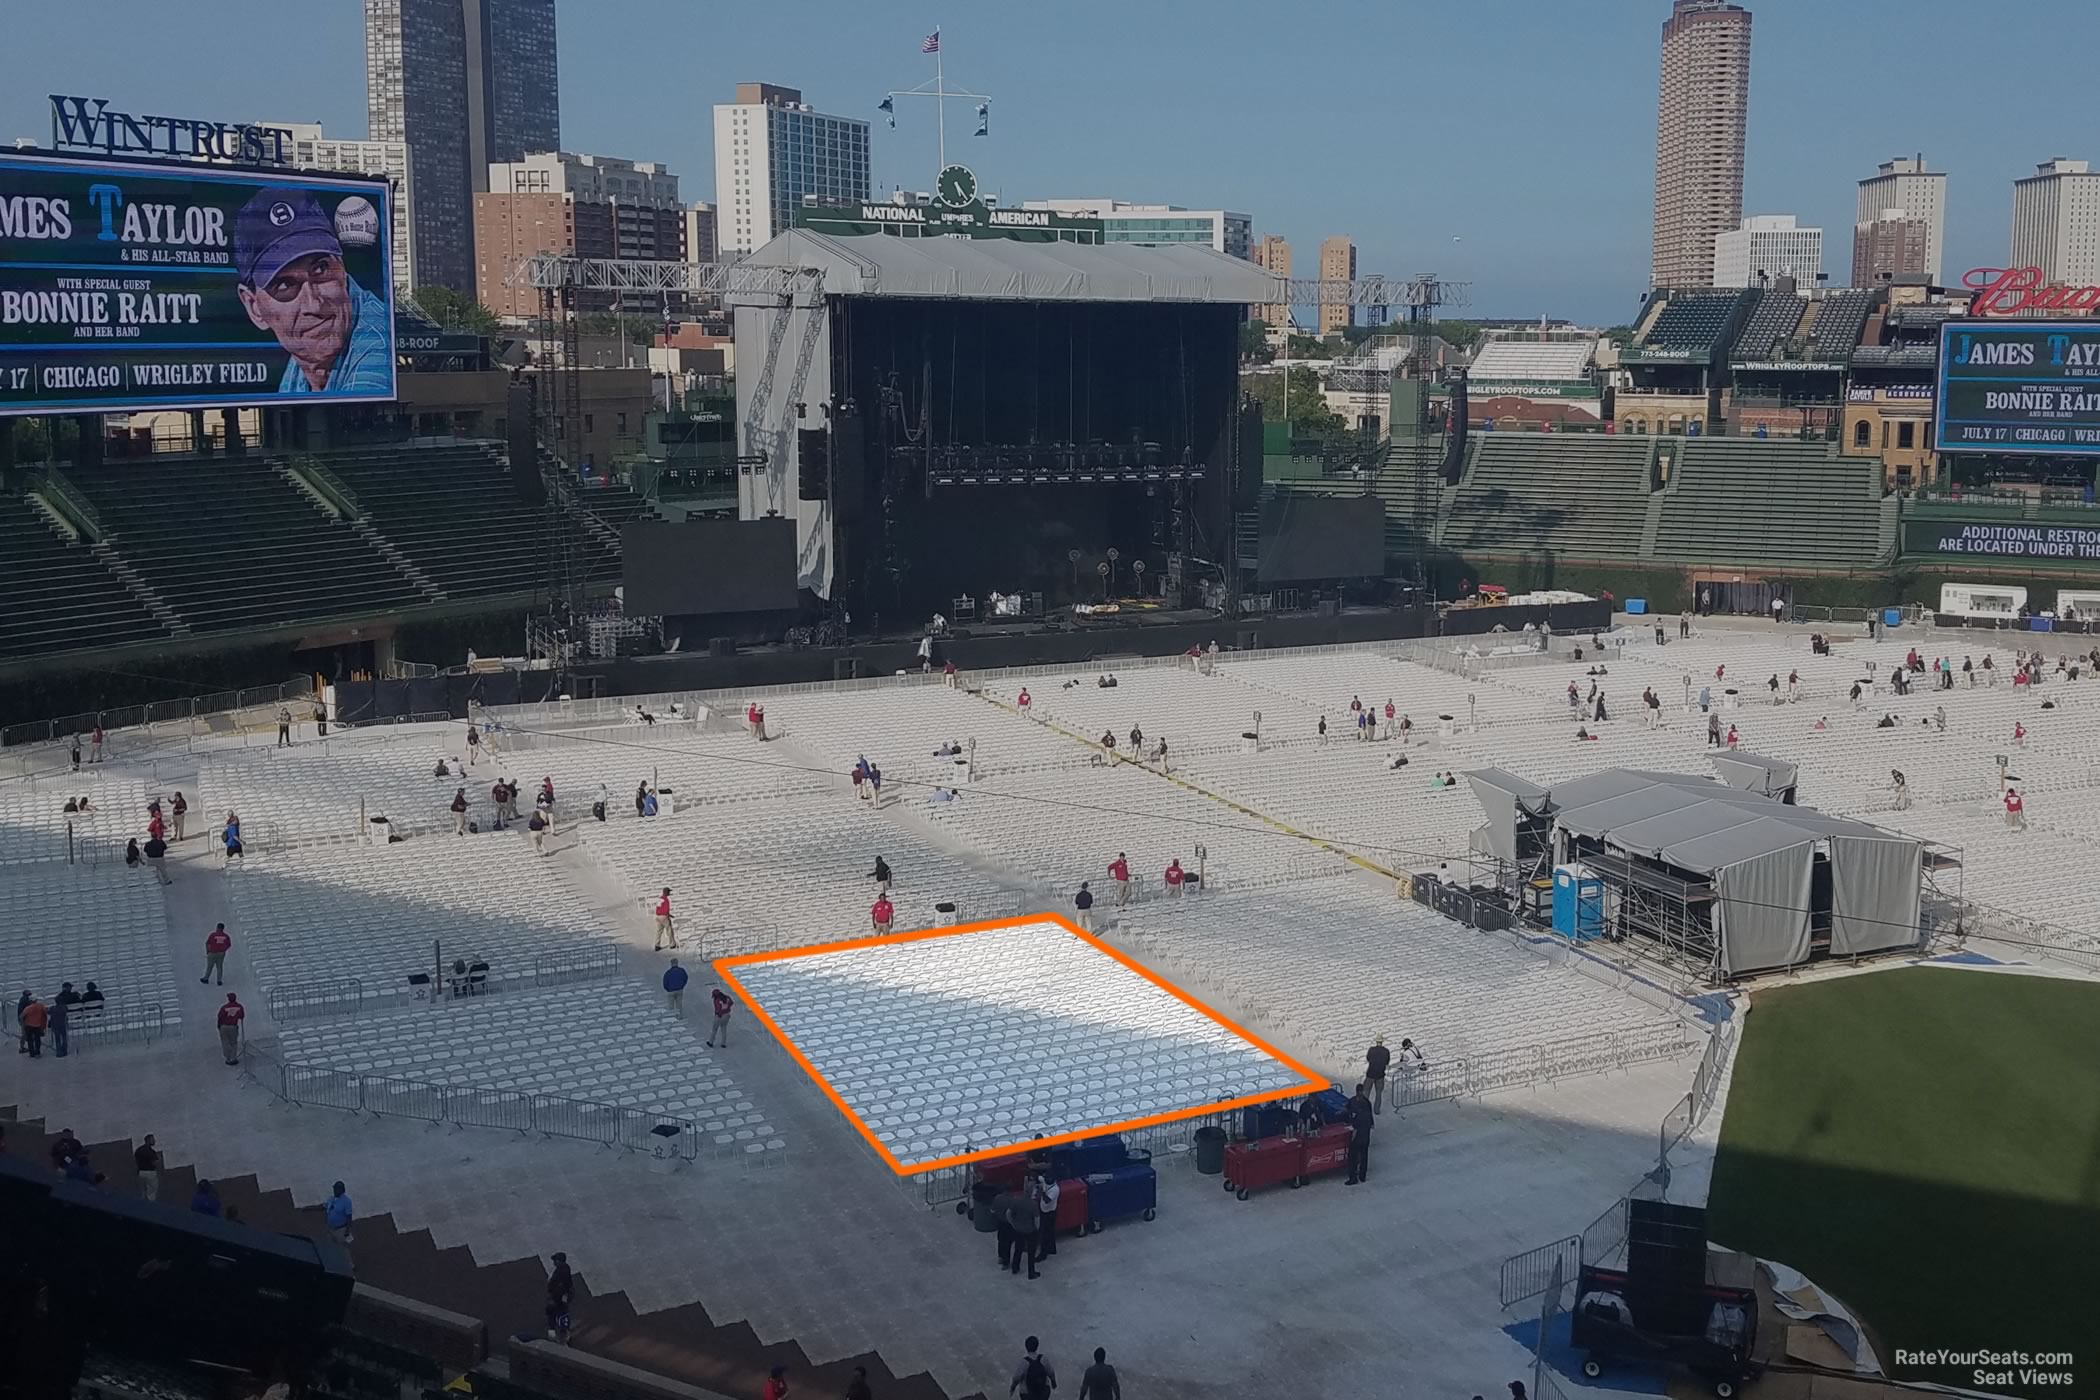 Help me pick the best seats for this concert at Wrigley Field